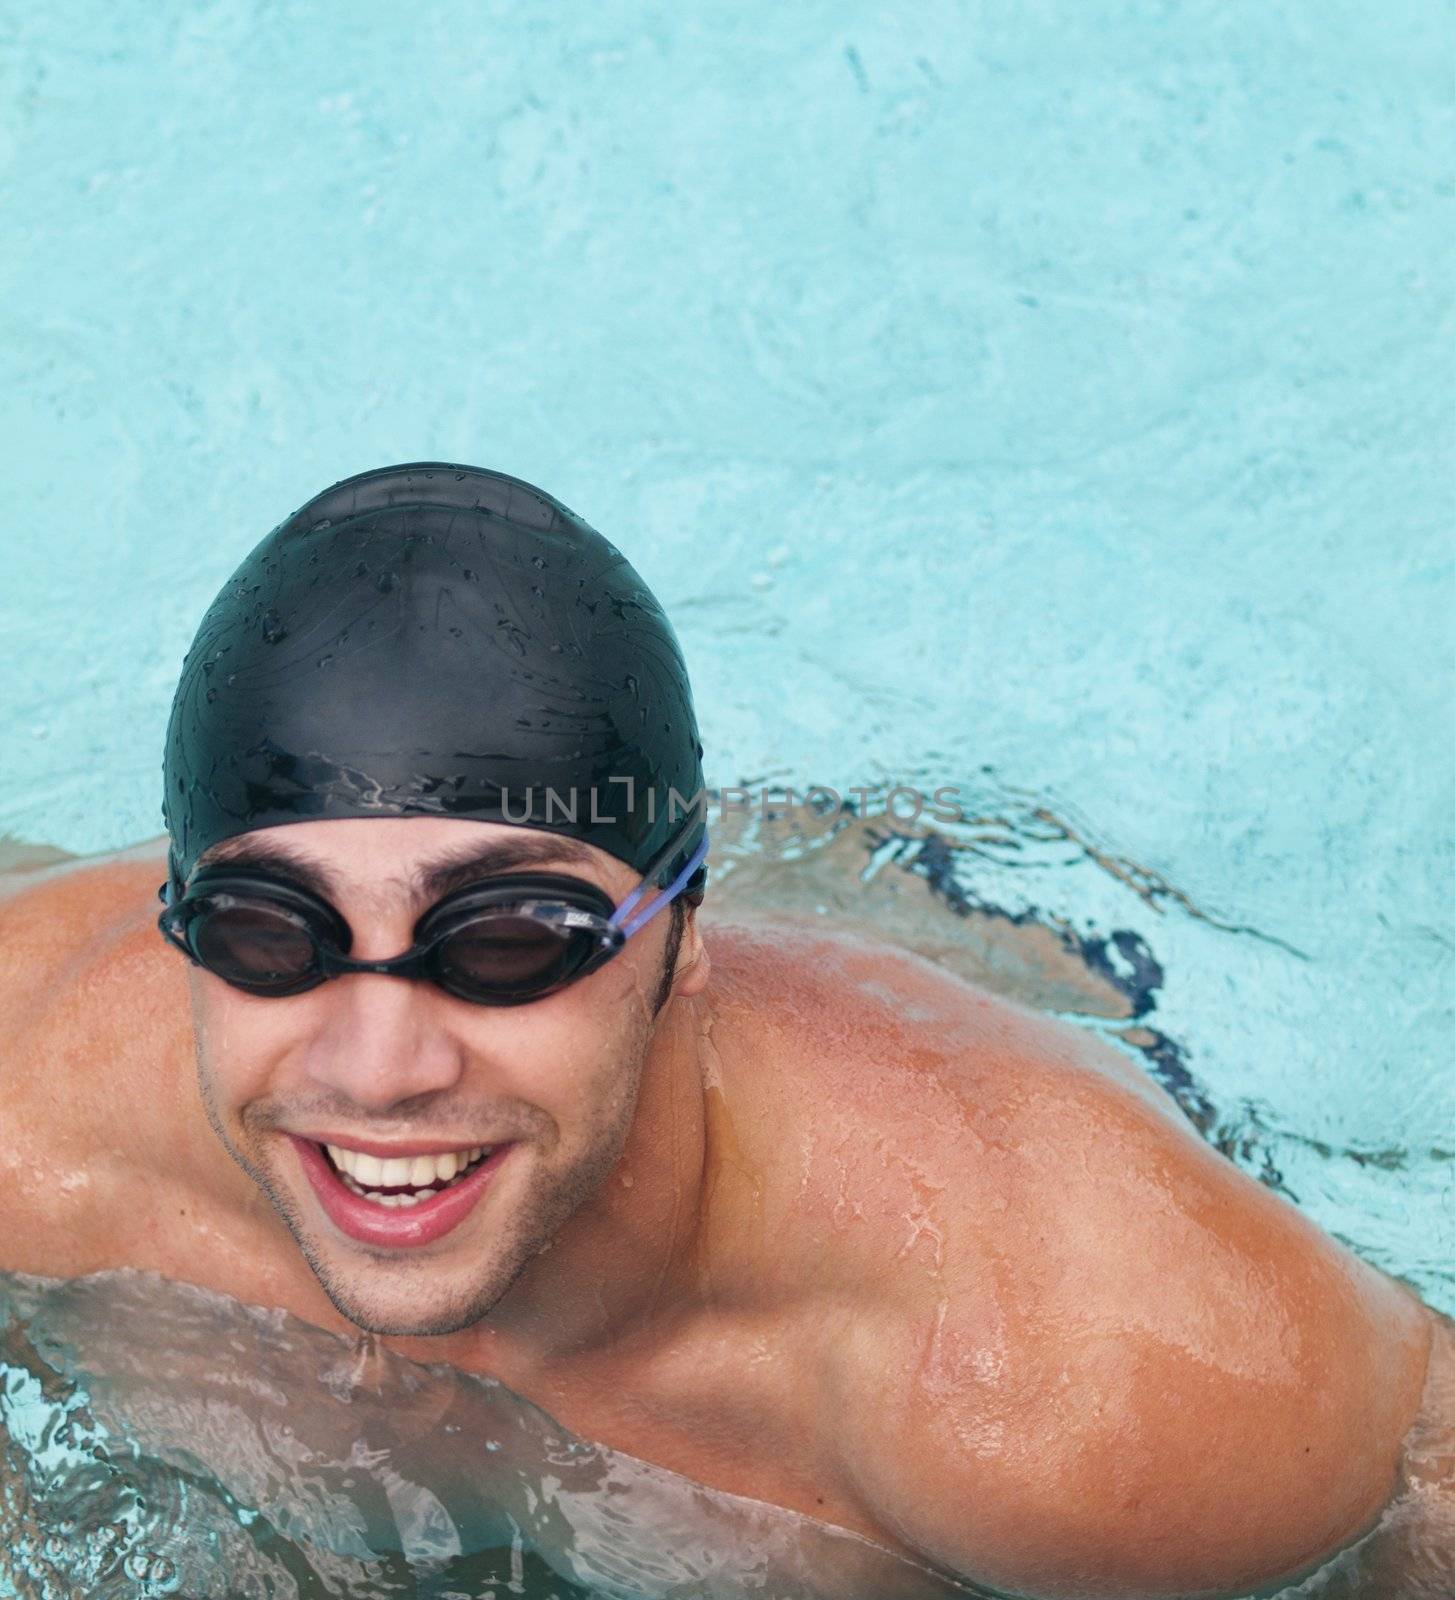 Male swimmer wearing cap and googles smiling